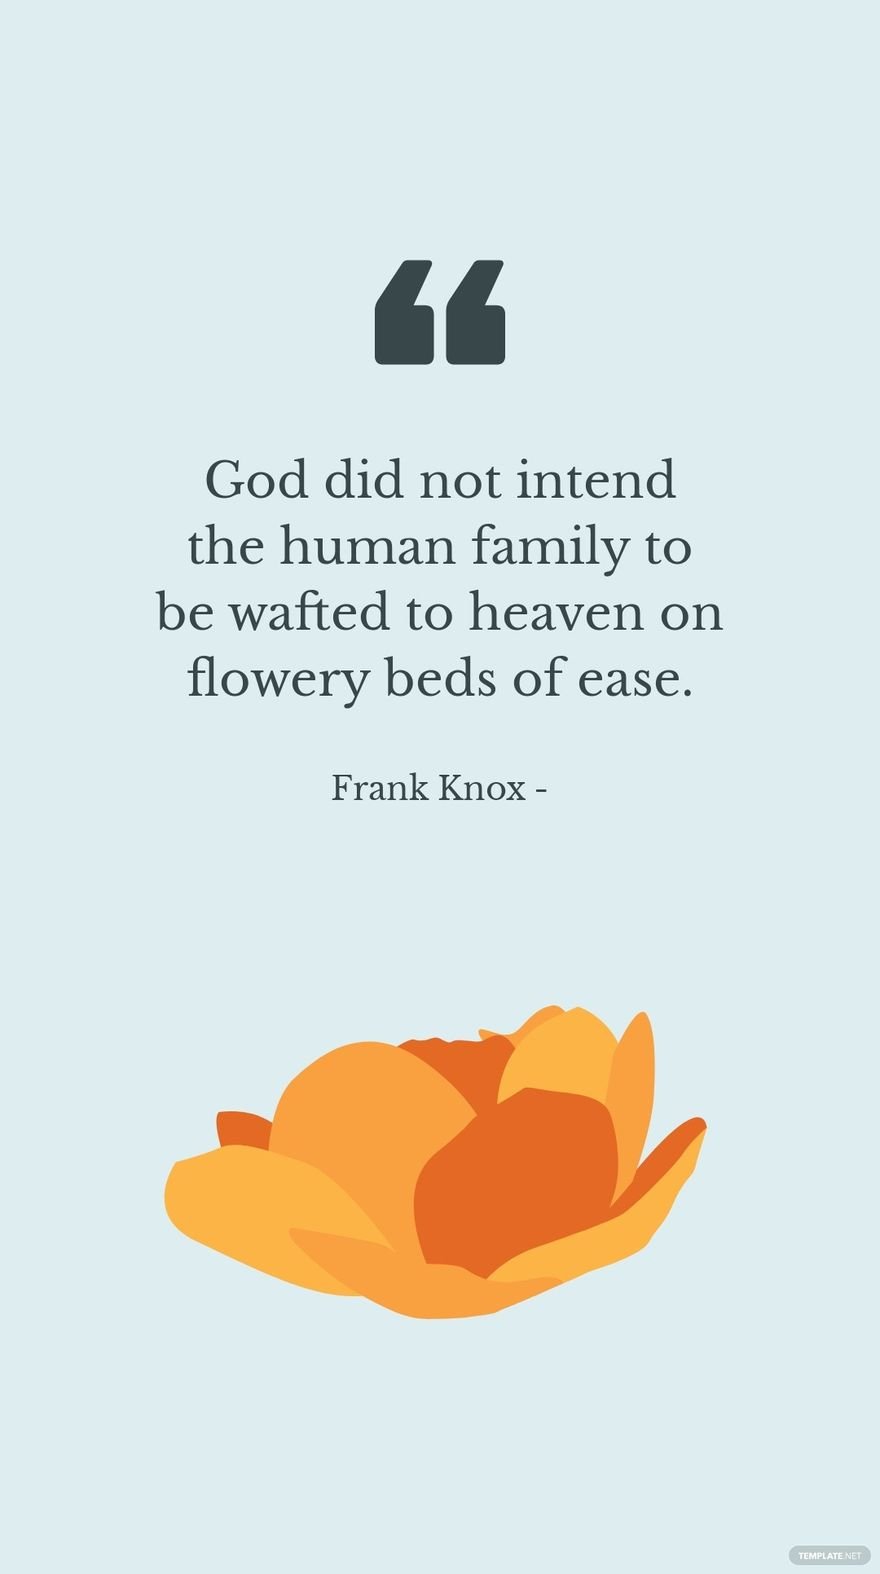 Free Frank Knox - God did not intend the human family to be wafted to heaven on flowery beds of ease.